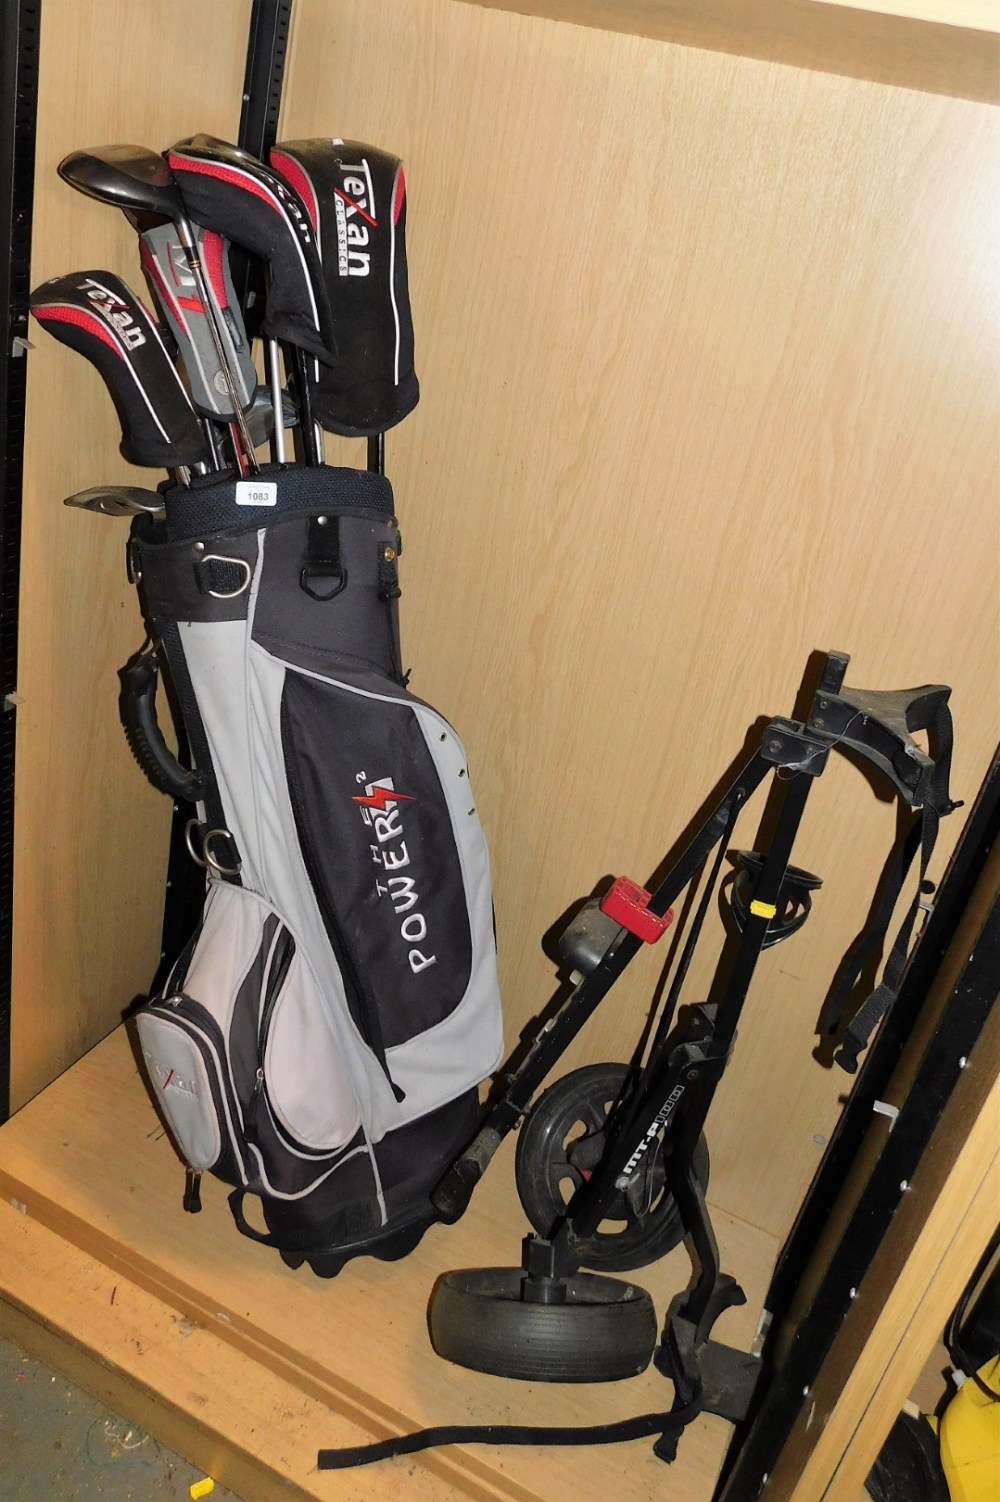 A Power 2 golf bag, containing various golf clubs, and a MT-P100 golf caddy.